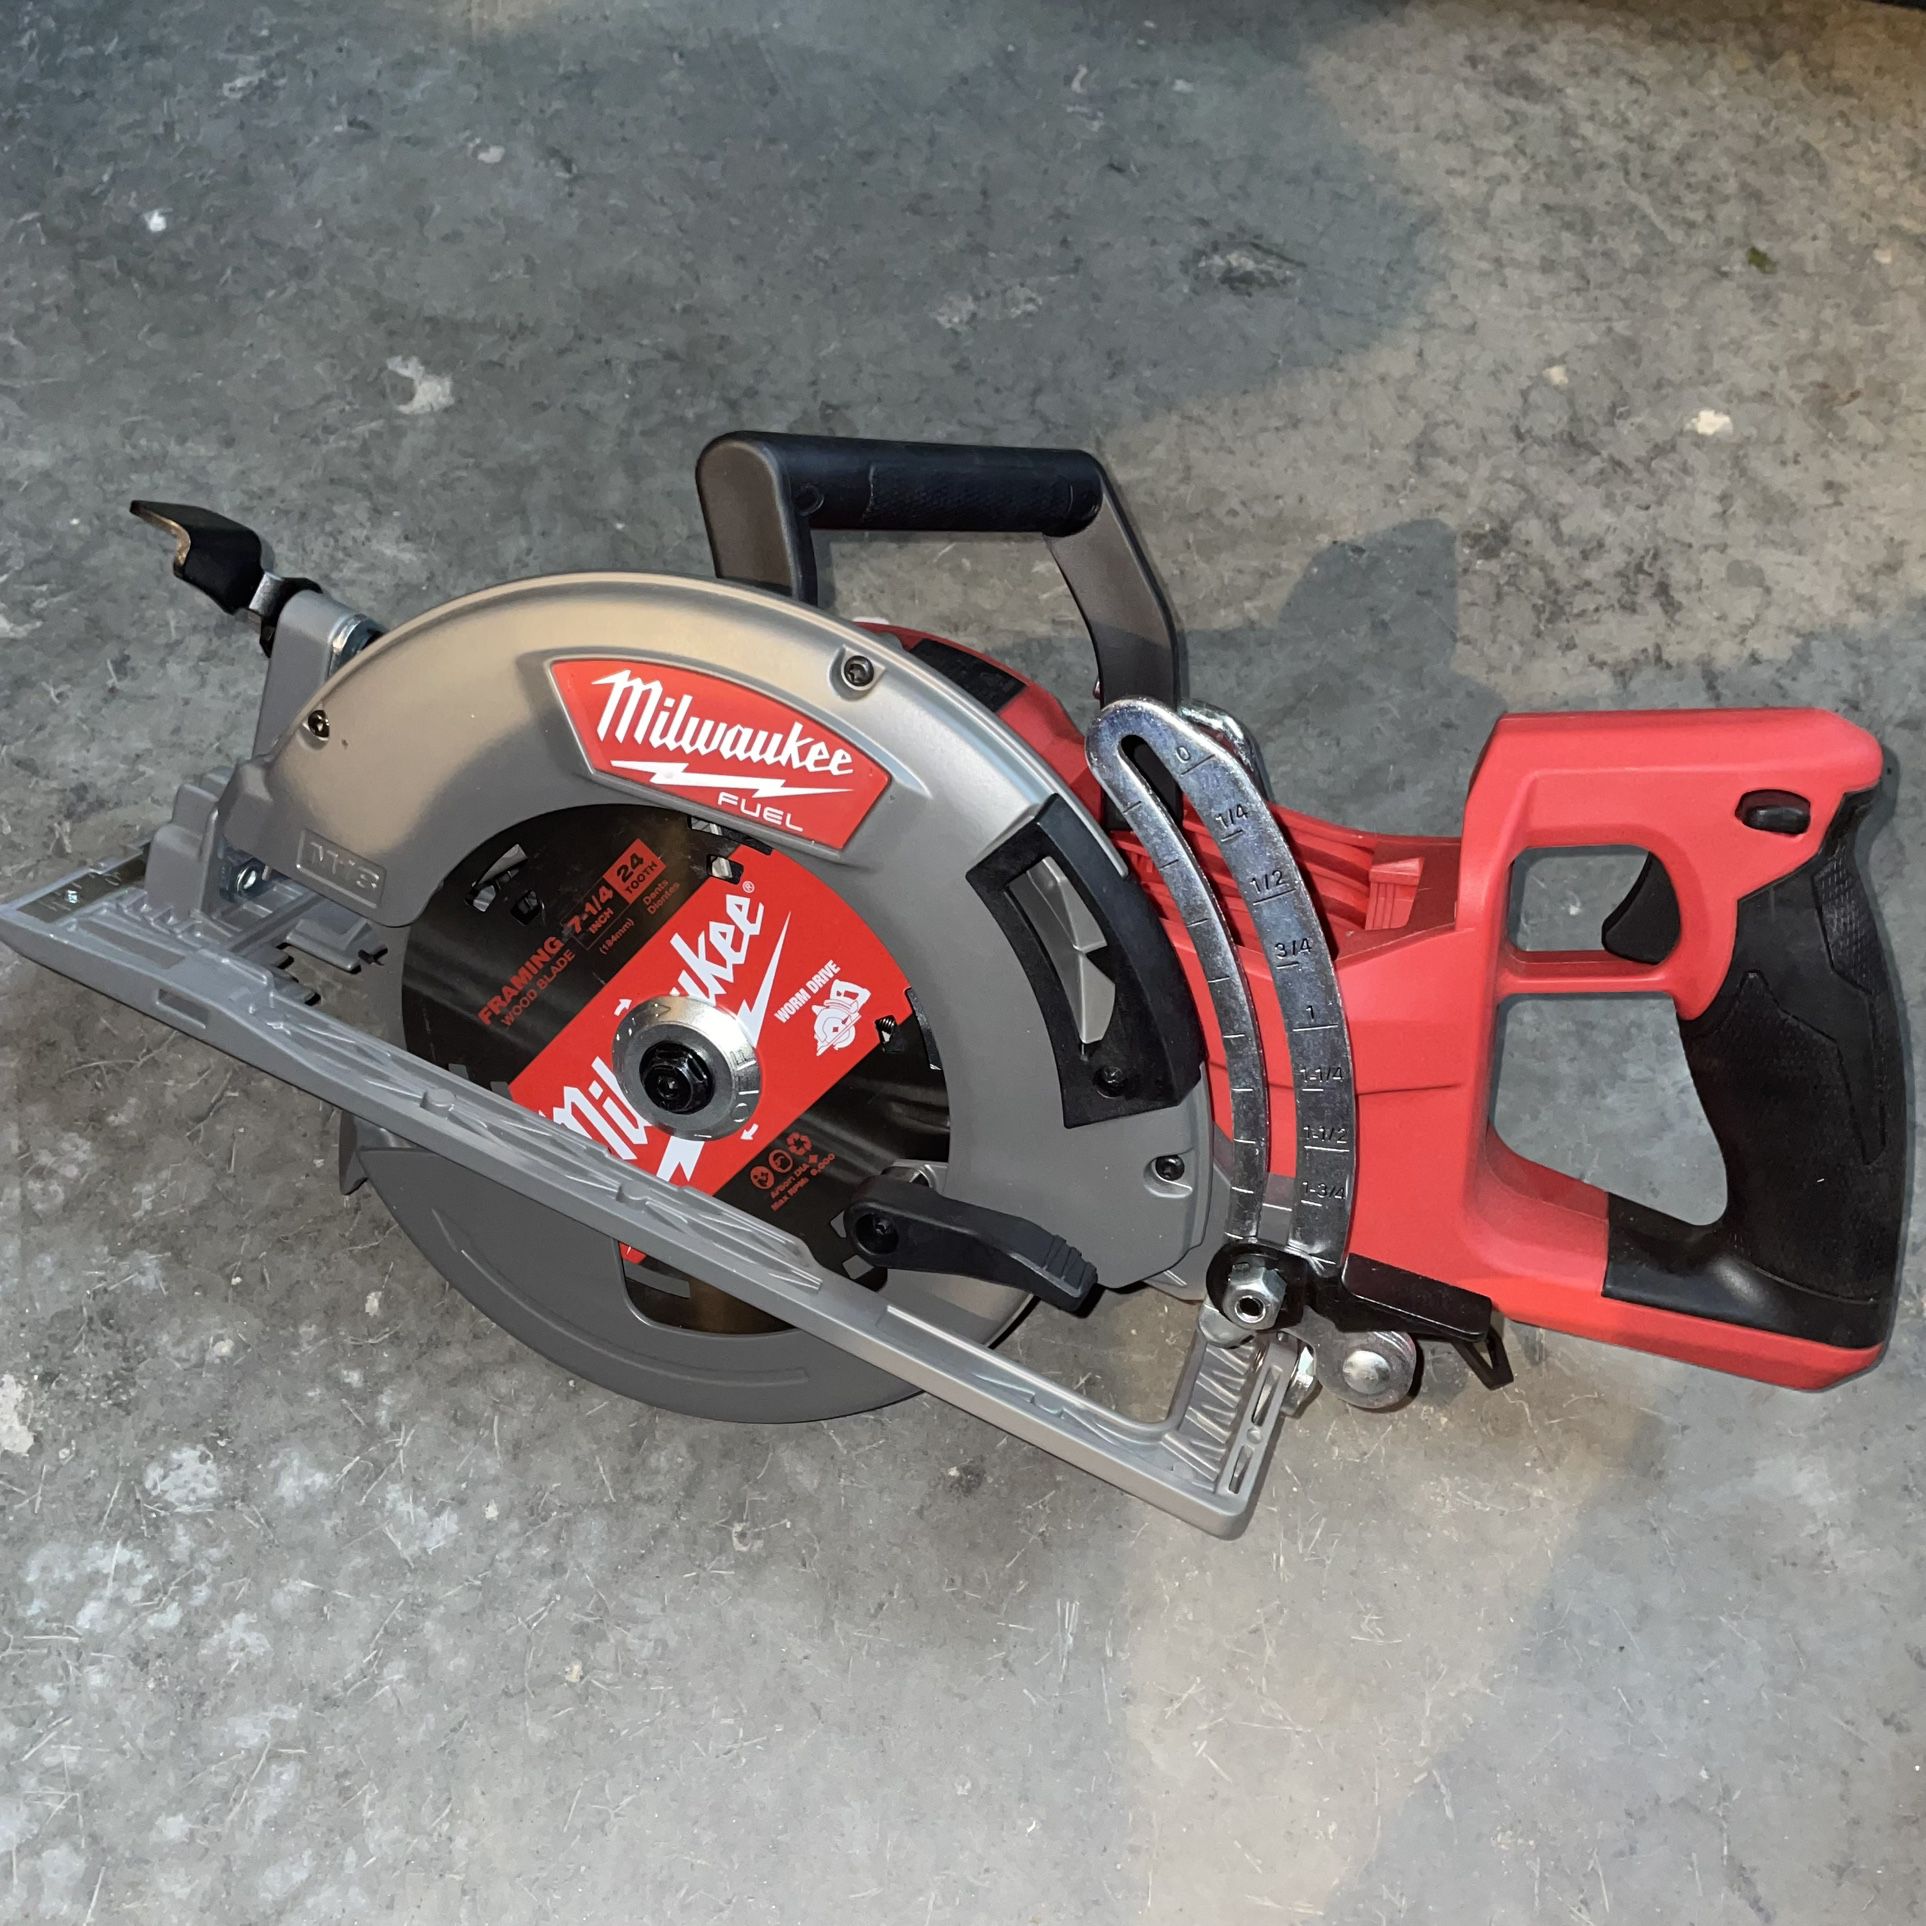 Milwaukee M18 FUEL 18V Lithium-Ion Cordless 7-1/4 in. Rear Handle Circular  Saw (Tool-Only) 2830-20 for Sale in Council Bluffs, IA OfferUp